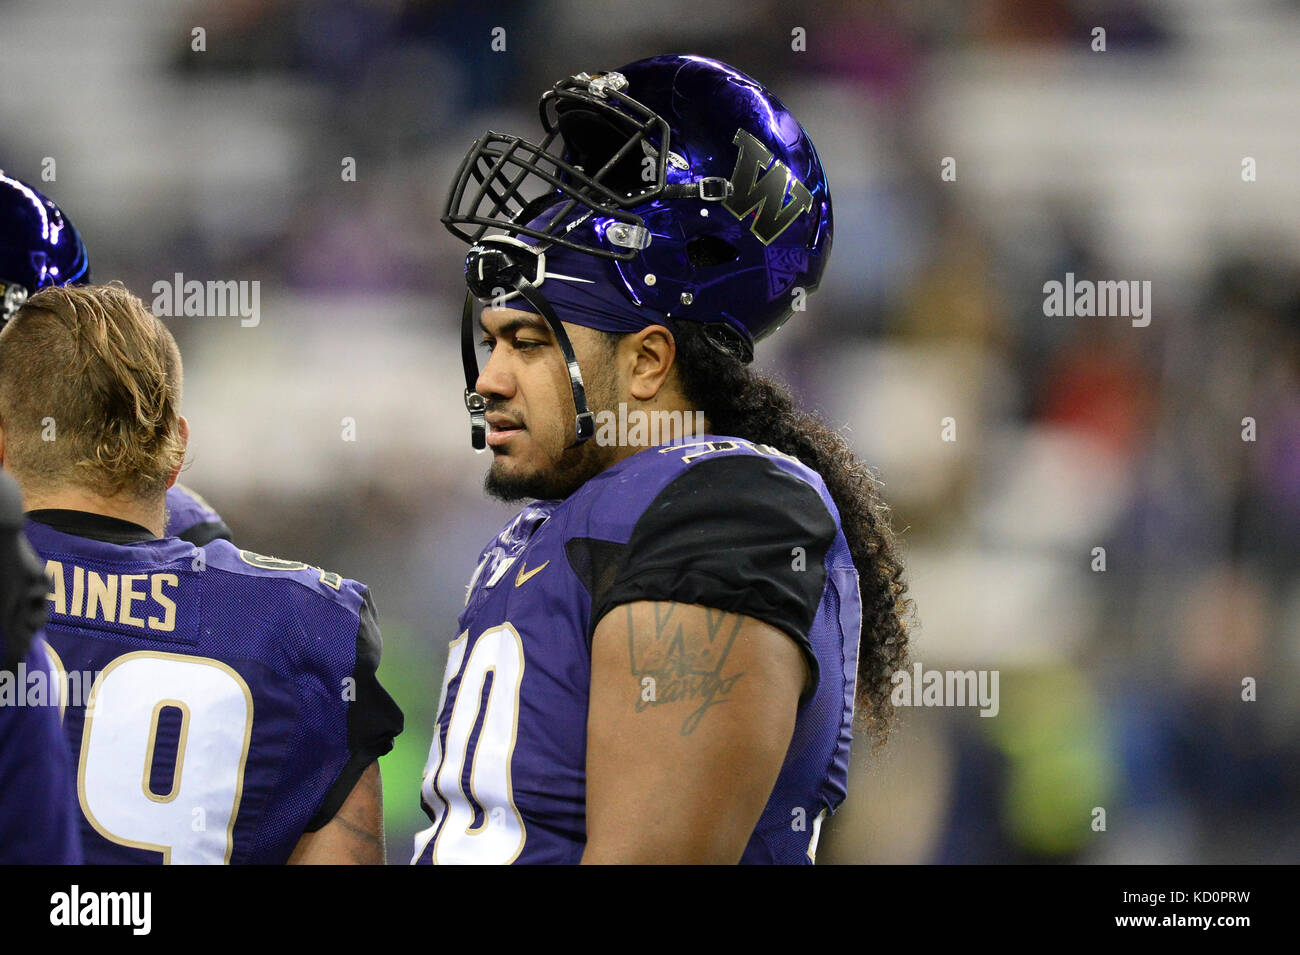 Seattle, WA, USA. 7th Oct, 2017. UW nose tackle Vita Vea (50) during a PAC12 football game between the Cal Bears and the Washington Huskies. The game was played at Husky Stadium on the University of Washington campus in Seattle, WA. Jeff Halstead/CSM/Alamy Live News Stock Photo